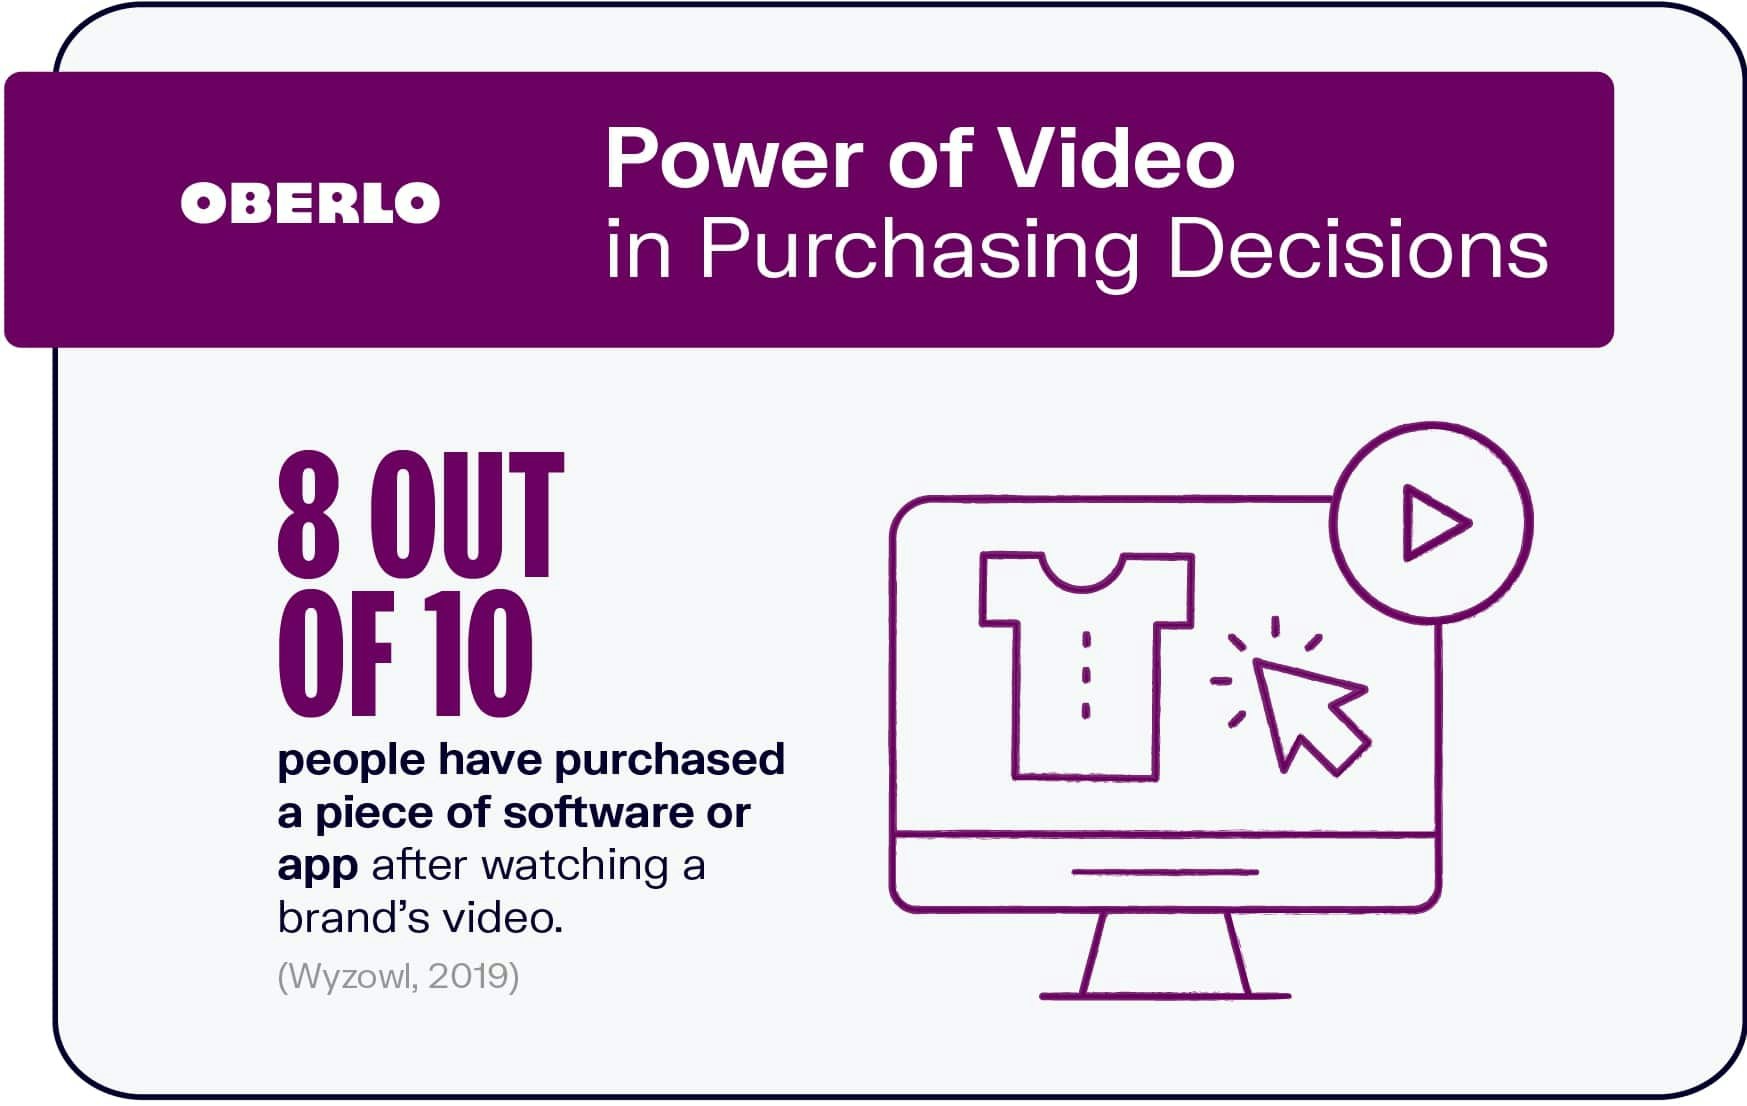 Power of Video in Purchasing Decisions